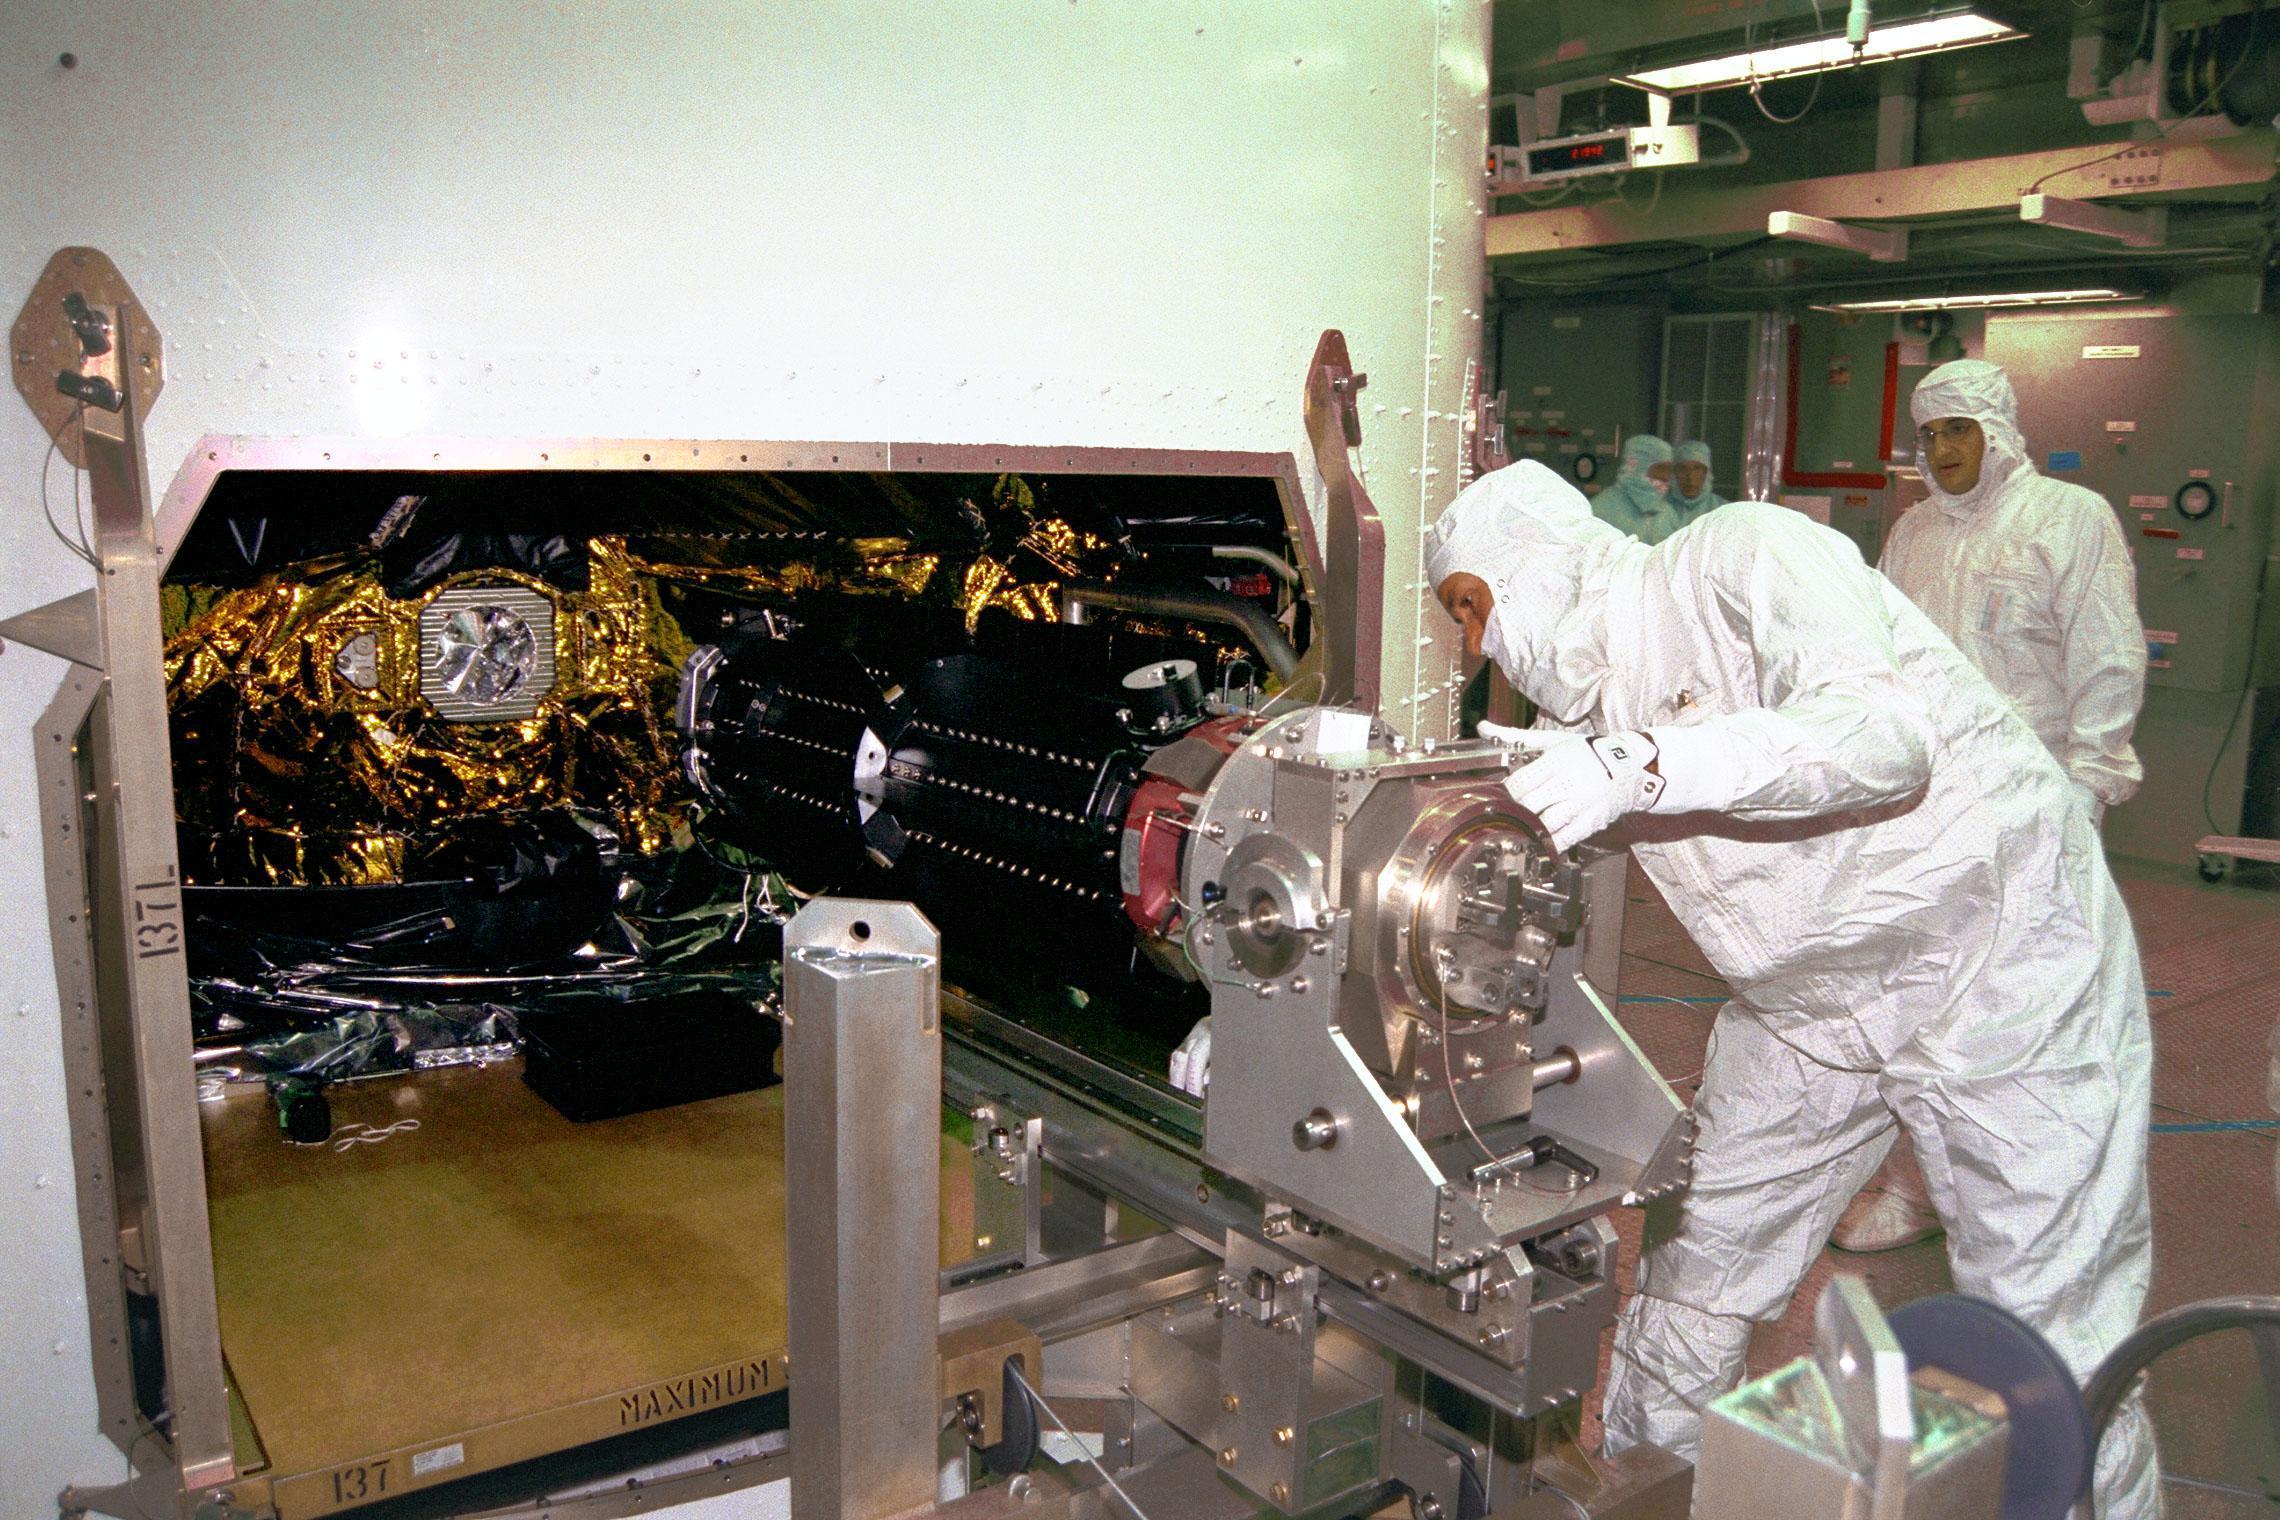 Engineers in cleanroom suits insert a cylindrical device into a spacecraft.